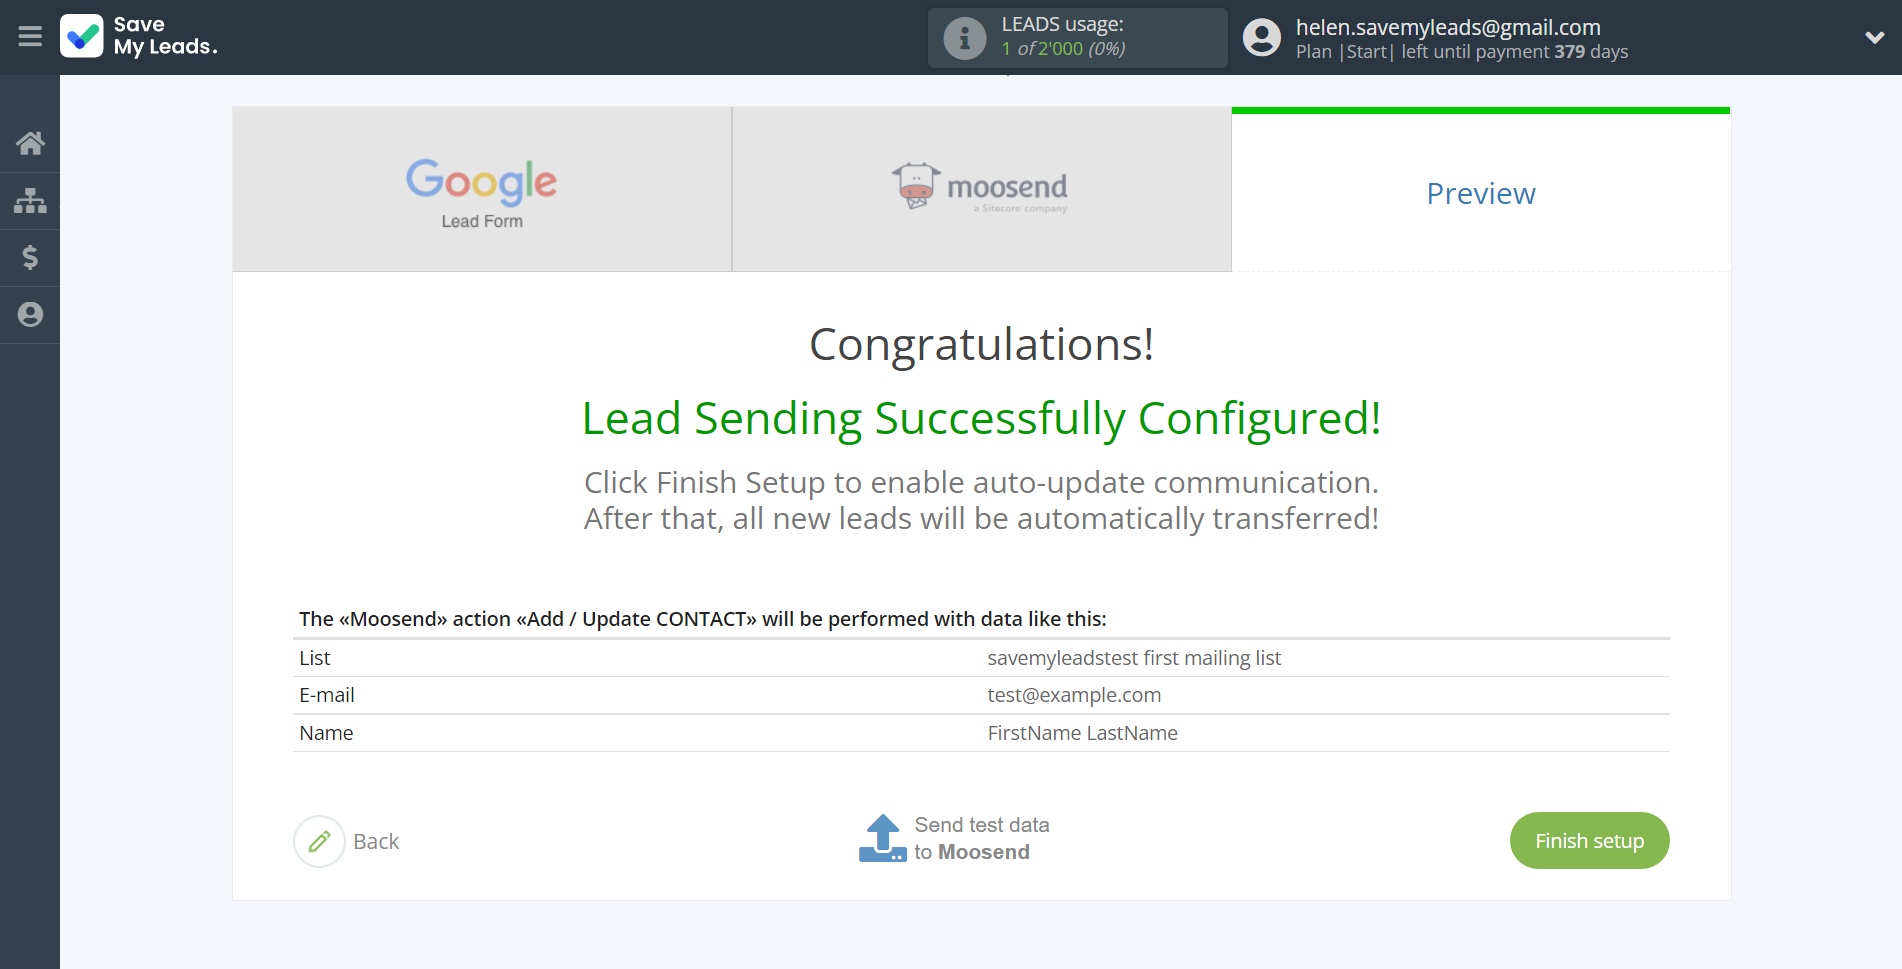 How to Connect Google Lead Form with Moosend | Test data